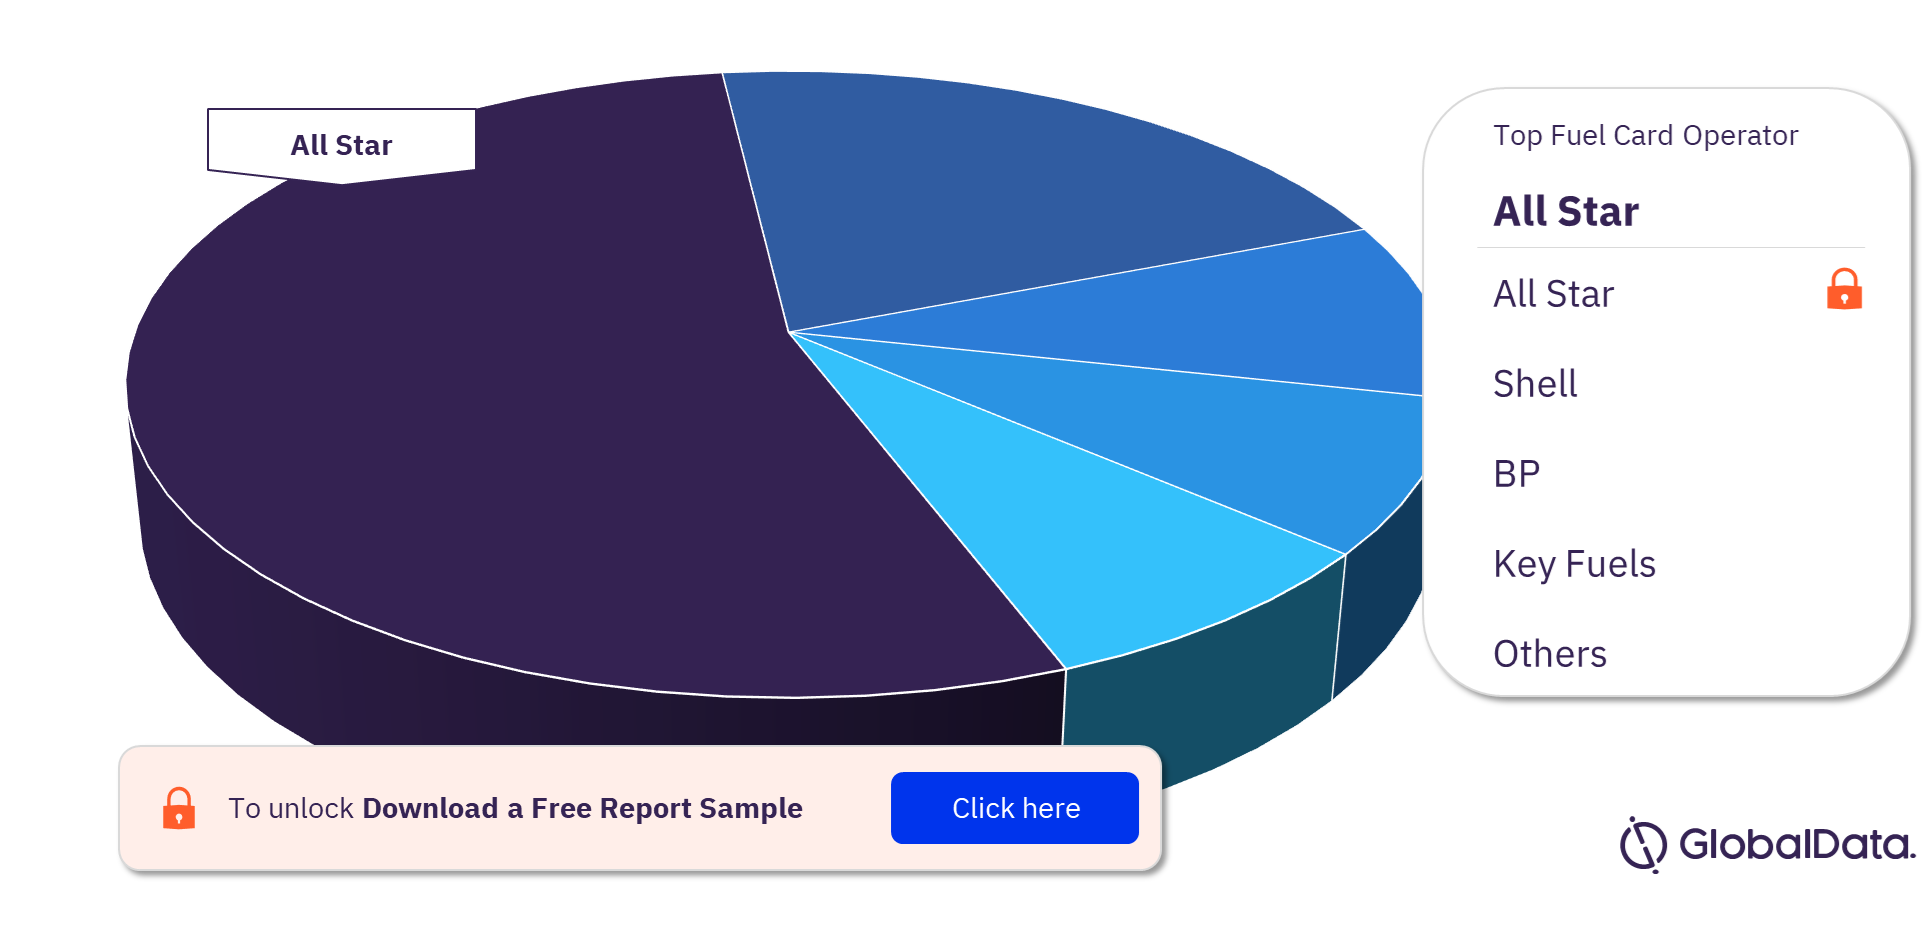 UK Fuel Cards Market Analysis by Fuel Card Operators, 2022 (%)